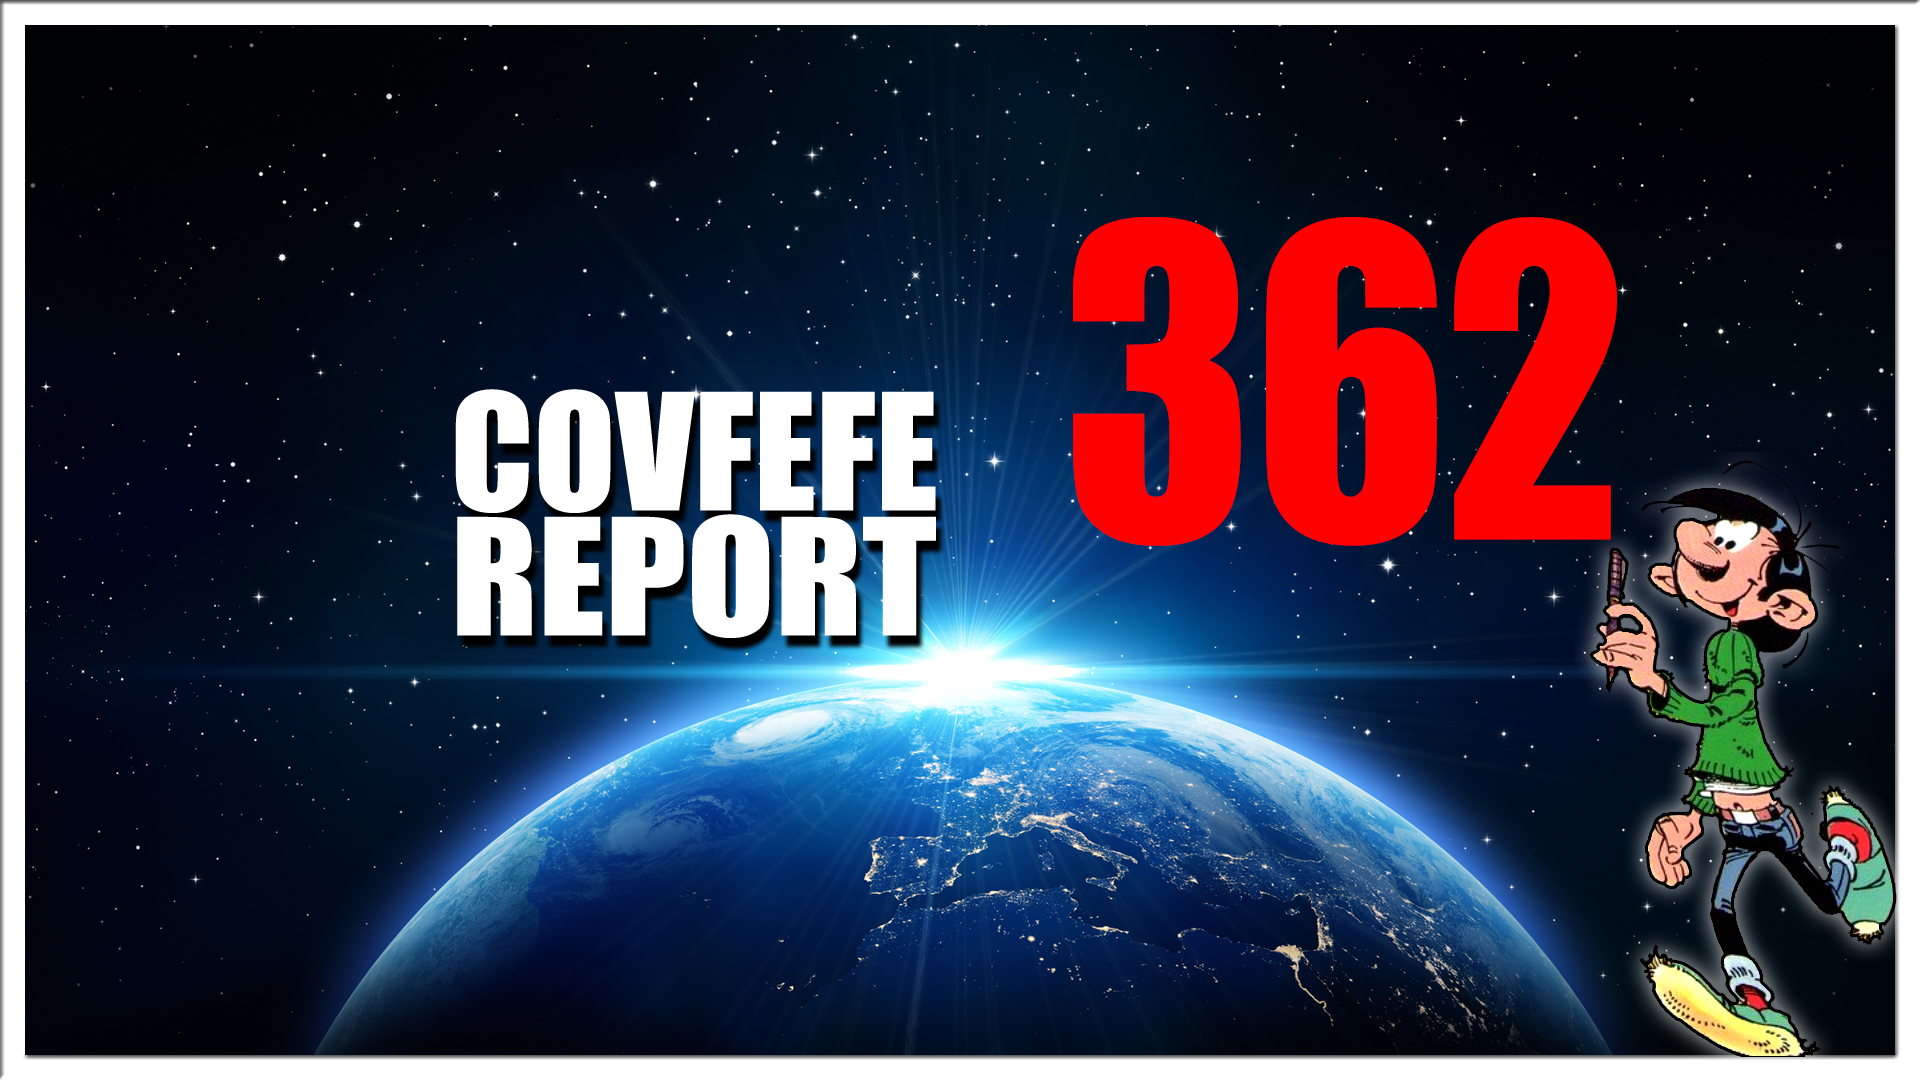 Covfefe Report 362. Anitifa thugs infiltreert, Pence volgt procedure, Save our Children